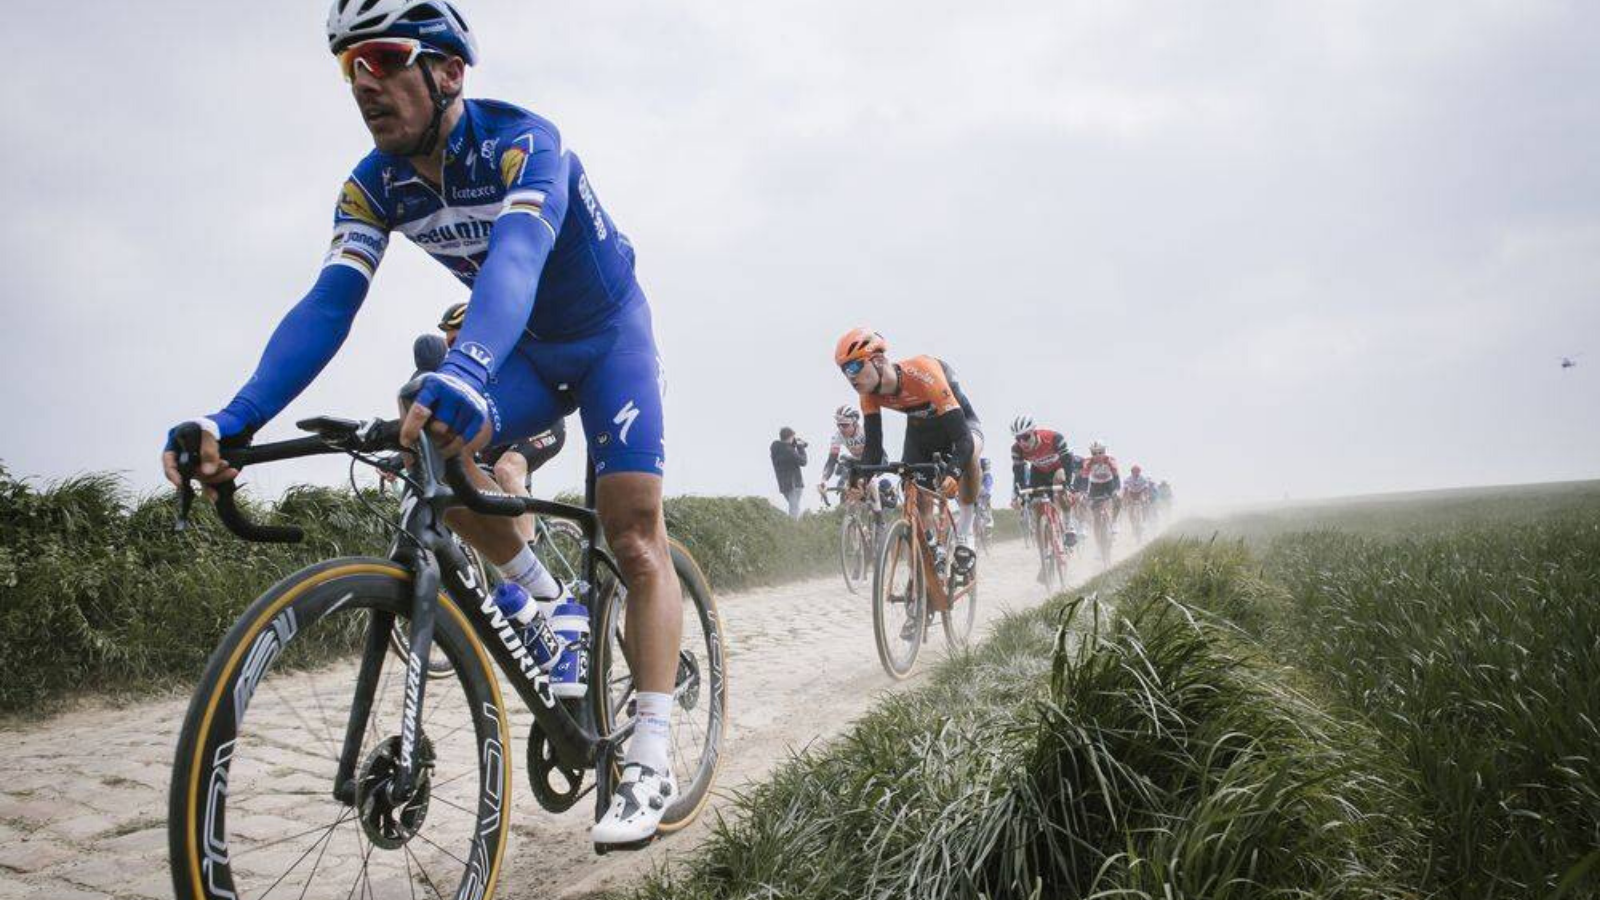 Philippe Gilbert leading the breakaway group at the Paris-Roubaix in 2019